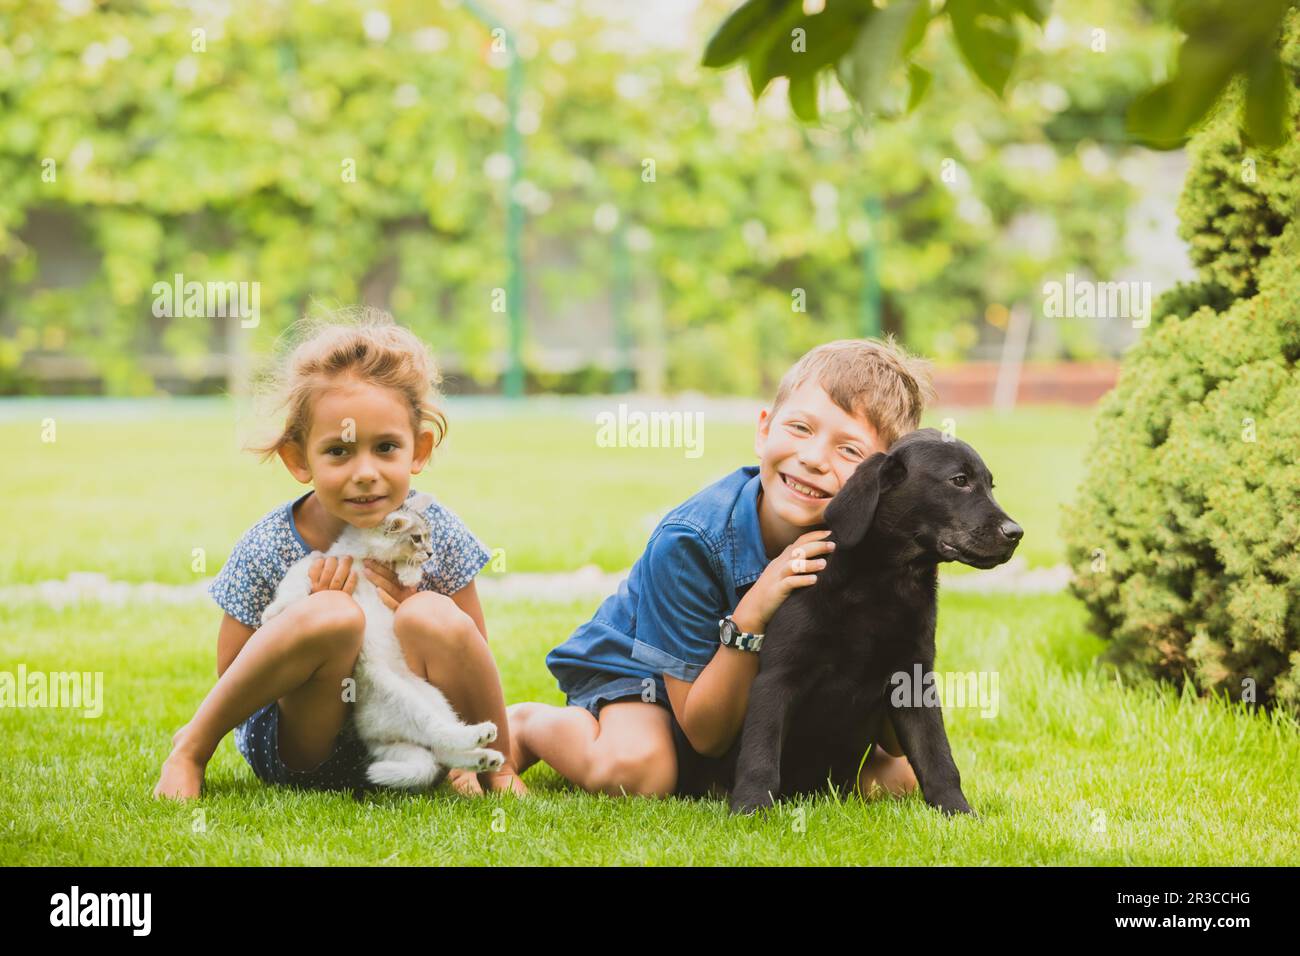 Close relationship between siblings and their pets Stock Photo